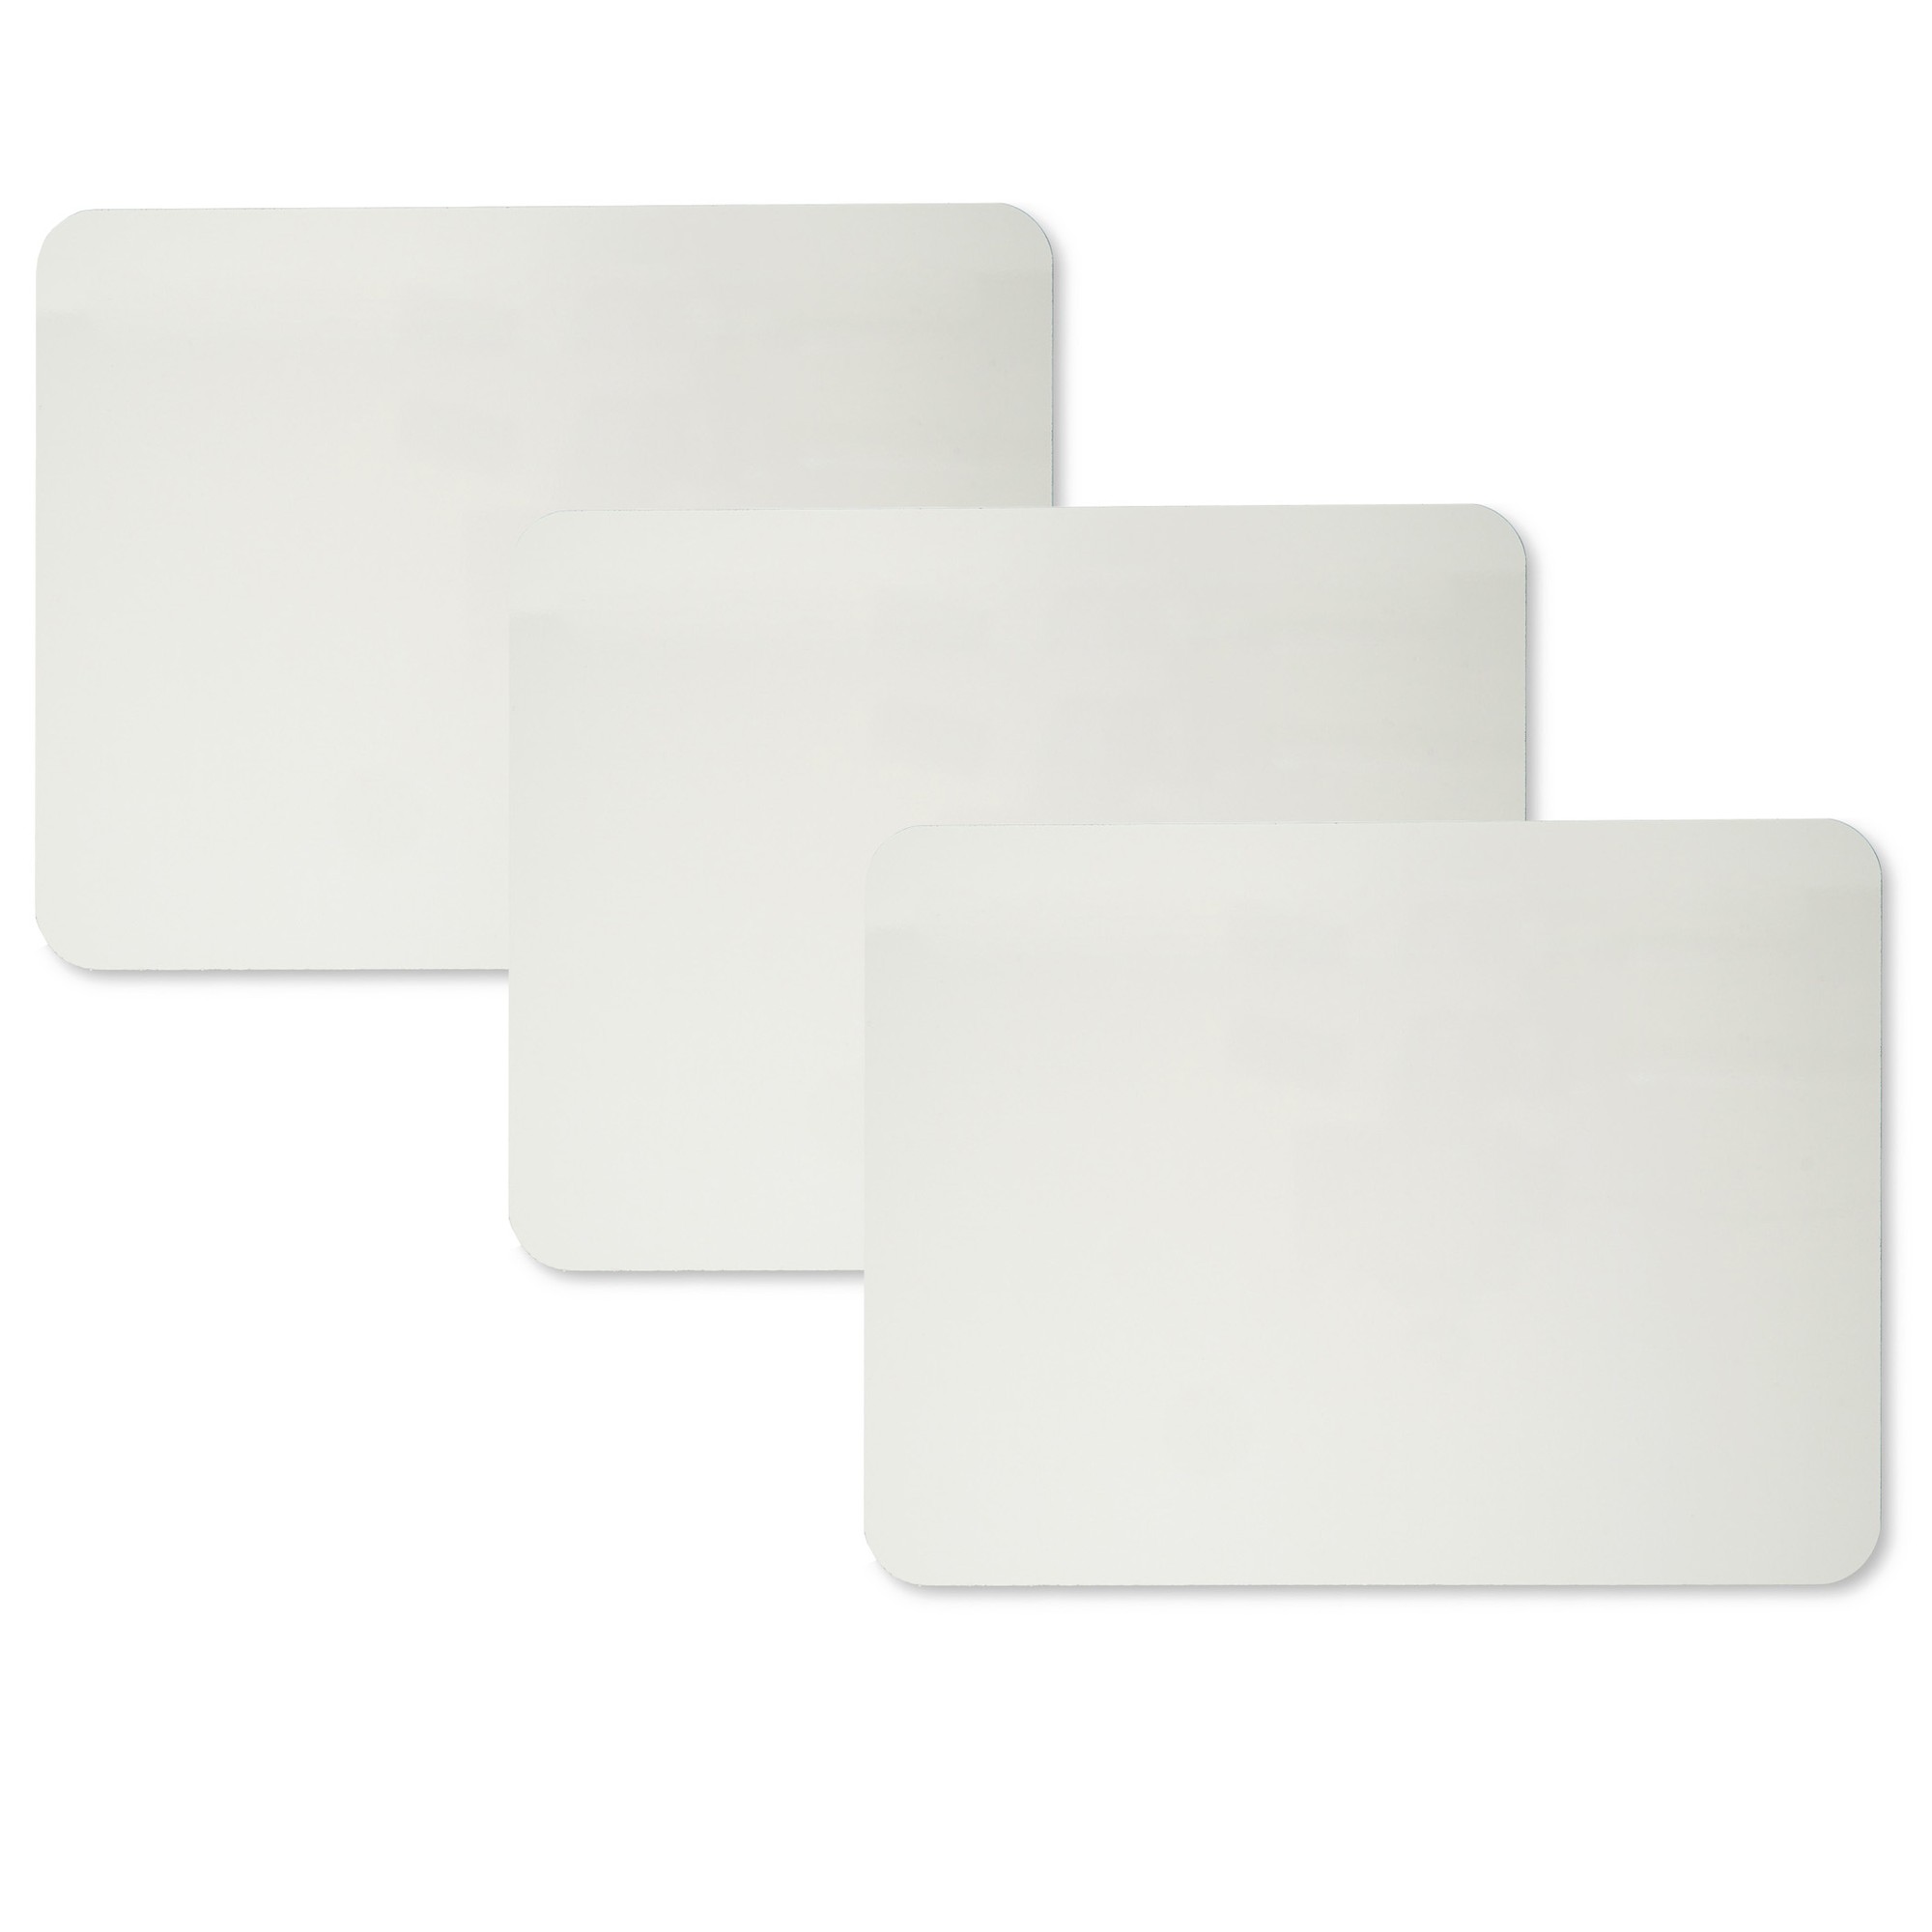 Magnetic Dry Erase Board, Two Sided, Plain/Plain, 9" x 12", Pack of 3